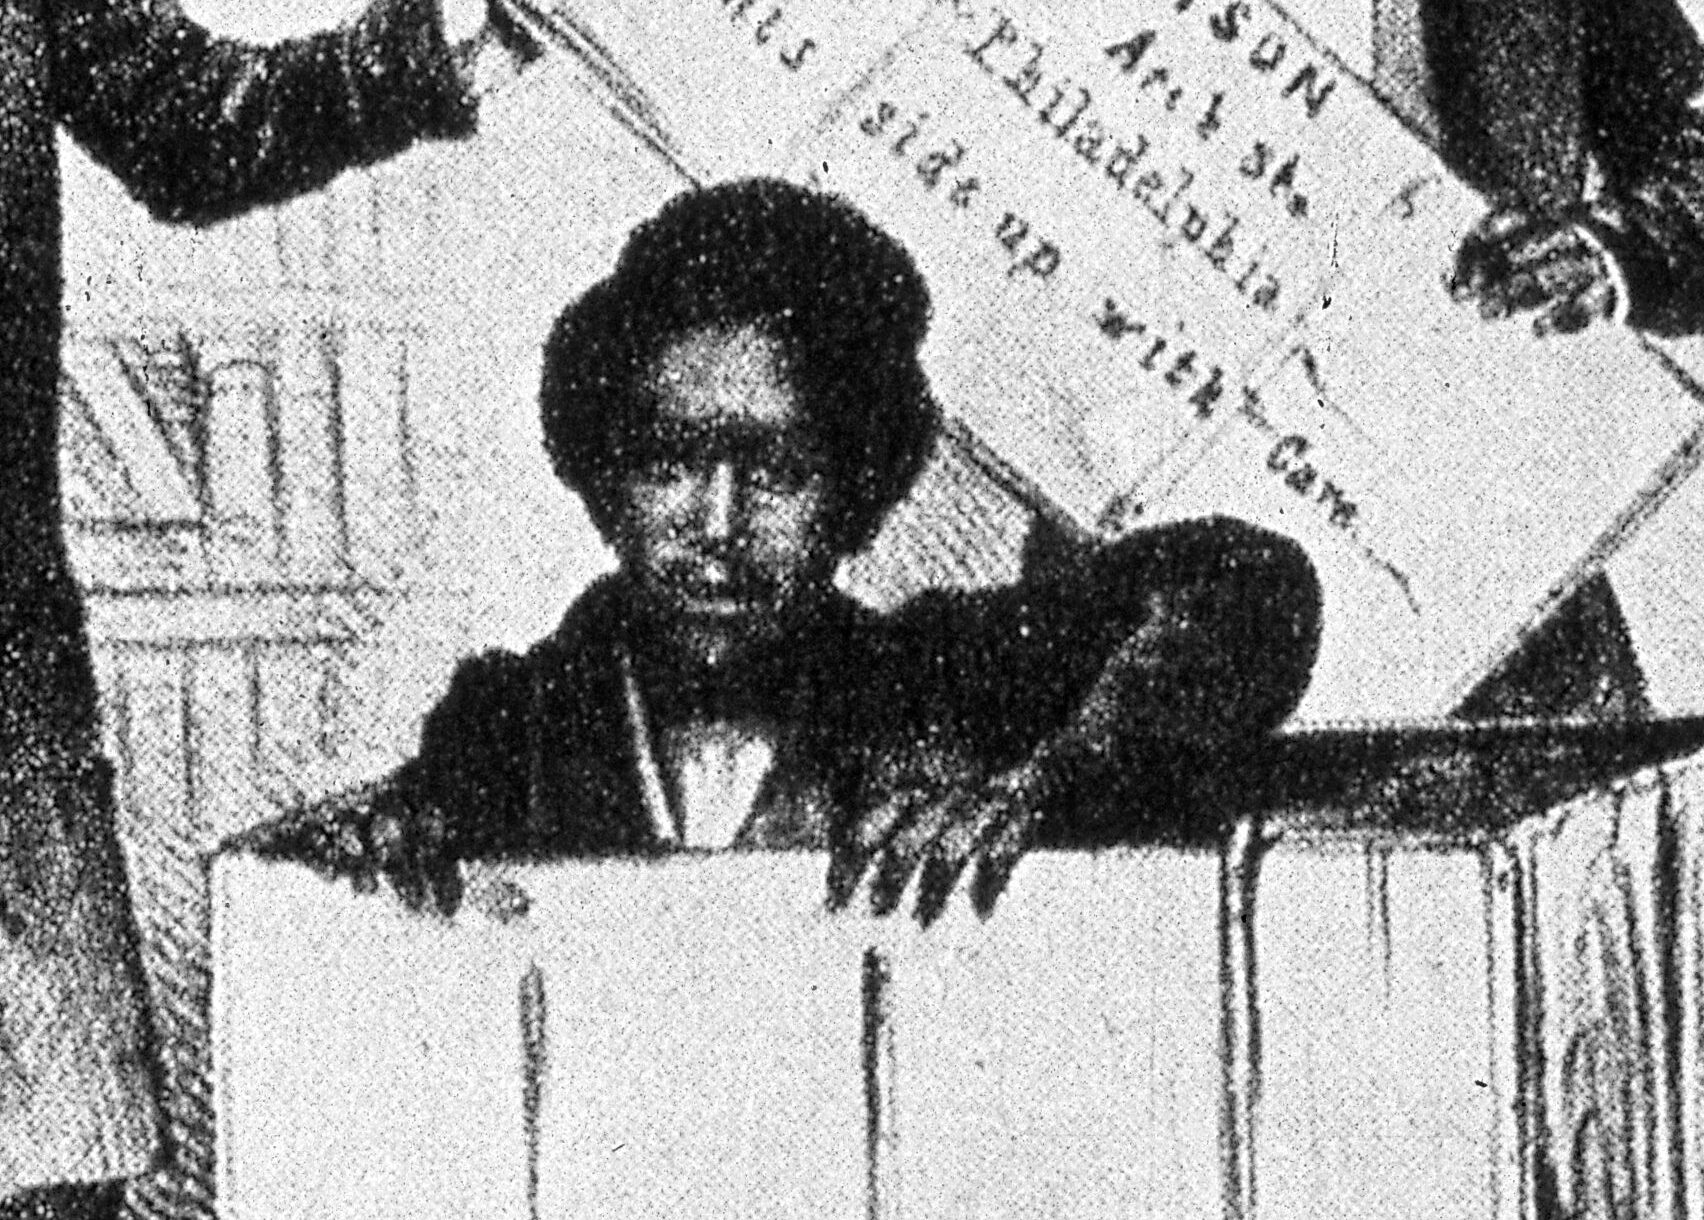 circa 1850: Henry 'Box' Brown arrives in Philadelphia. He mailed himself to freedom in a three-foot box from Richmond, Virginia to the Anti-Slavery office in Philadelphia. The delivery took 26 hours. 